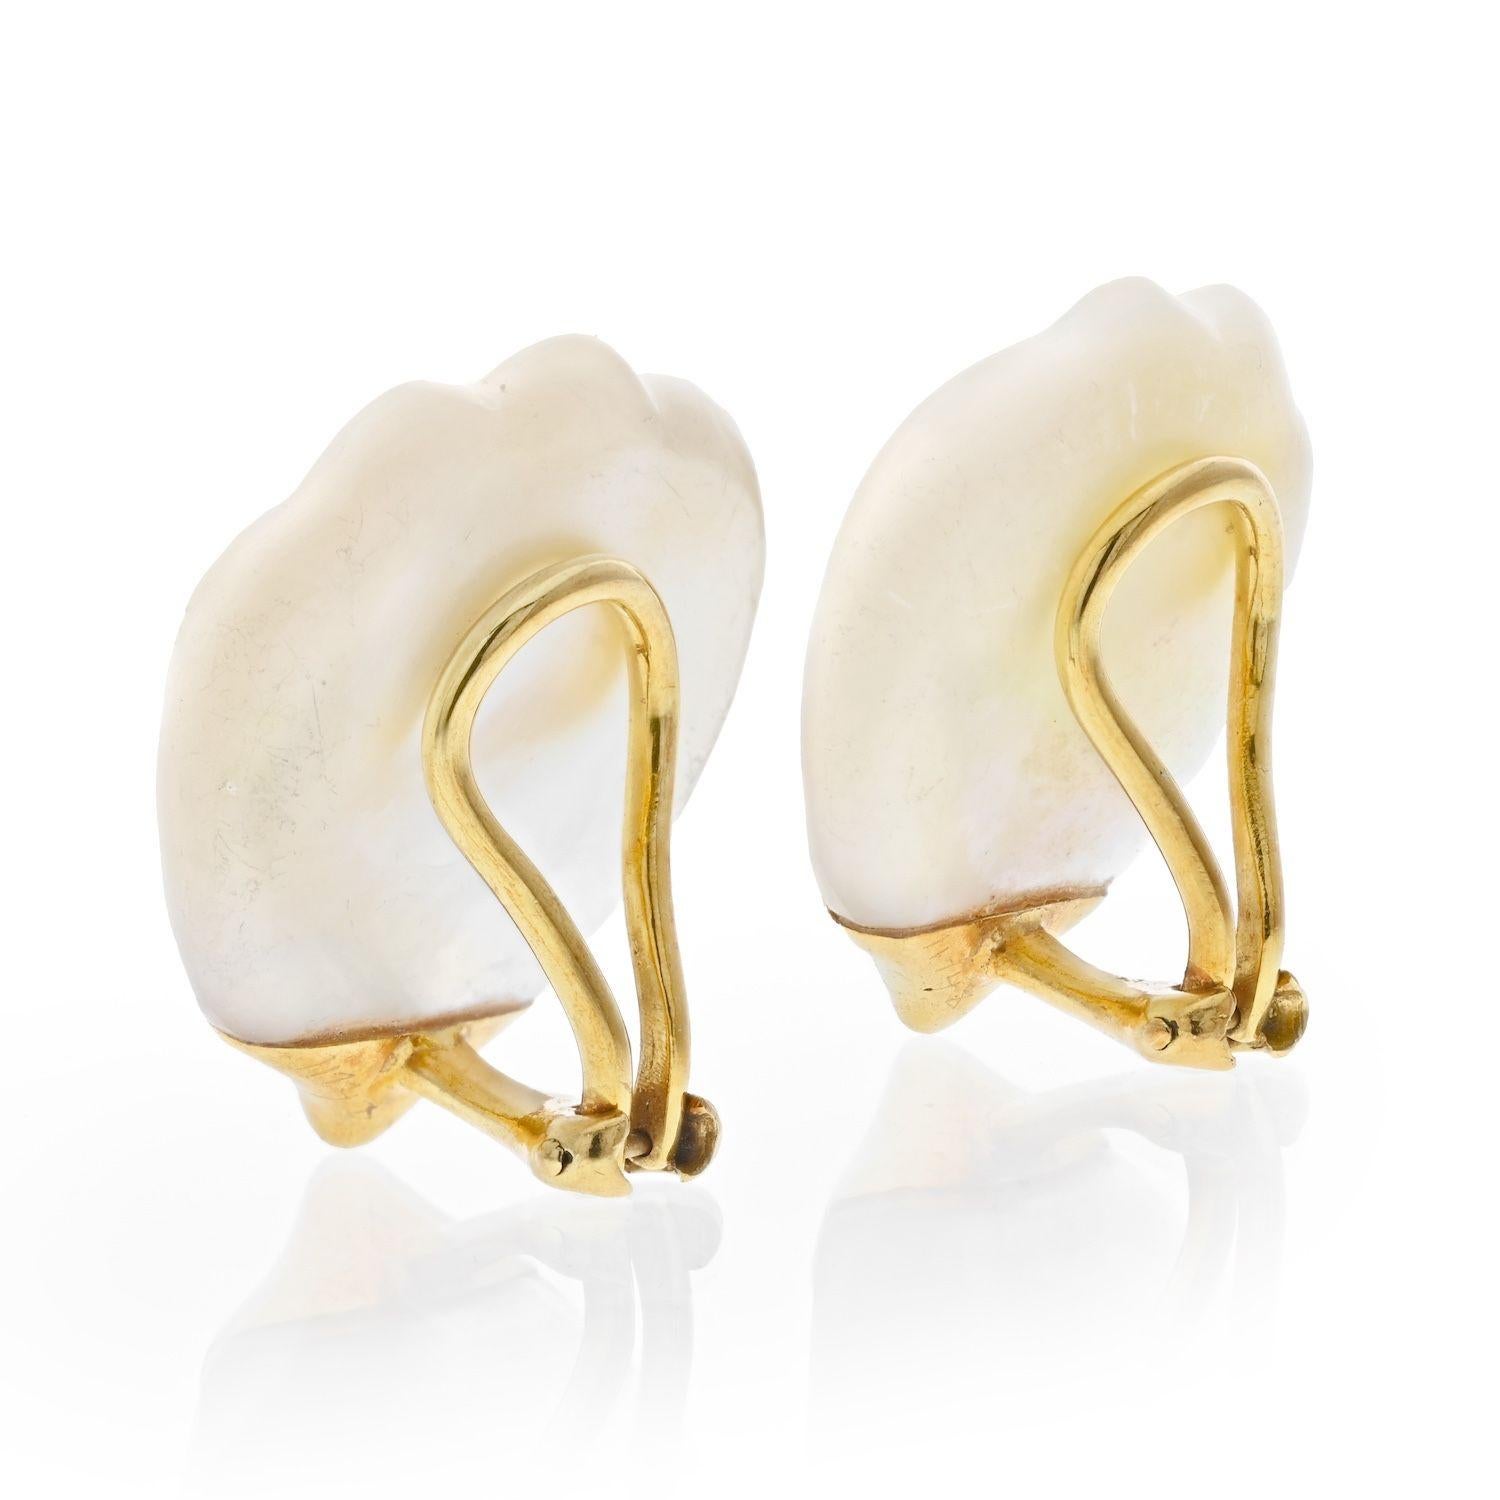 Tiffany & Co. Angela Cummings mother-of-pearl blossom clip-on earrings set in 18K yellow gold. There are two mother-of-pearl (20.0mm x 24.0mm), which are capped with high polish gold. Each earring measures 25.6mm x 24.0mm, with a total weight for